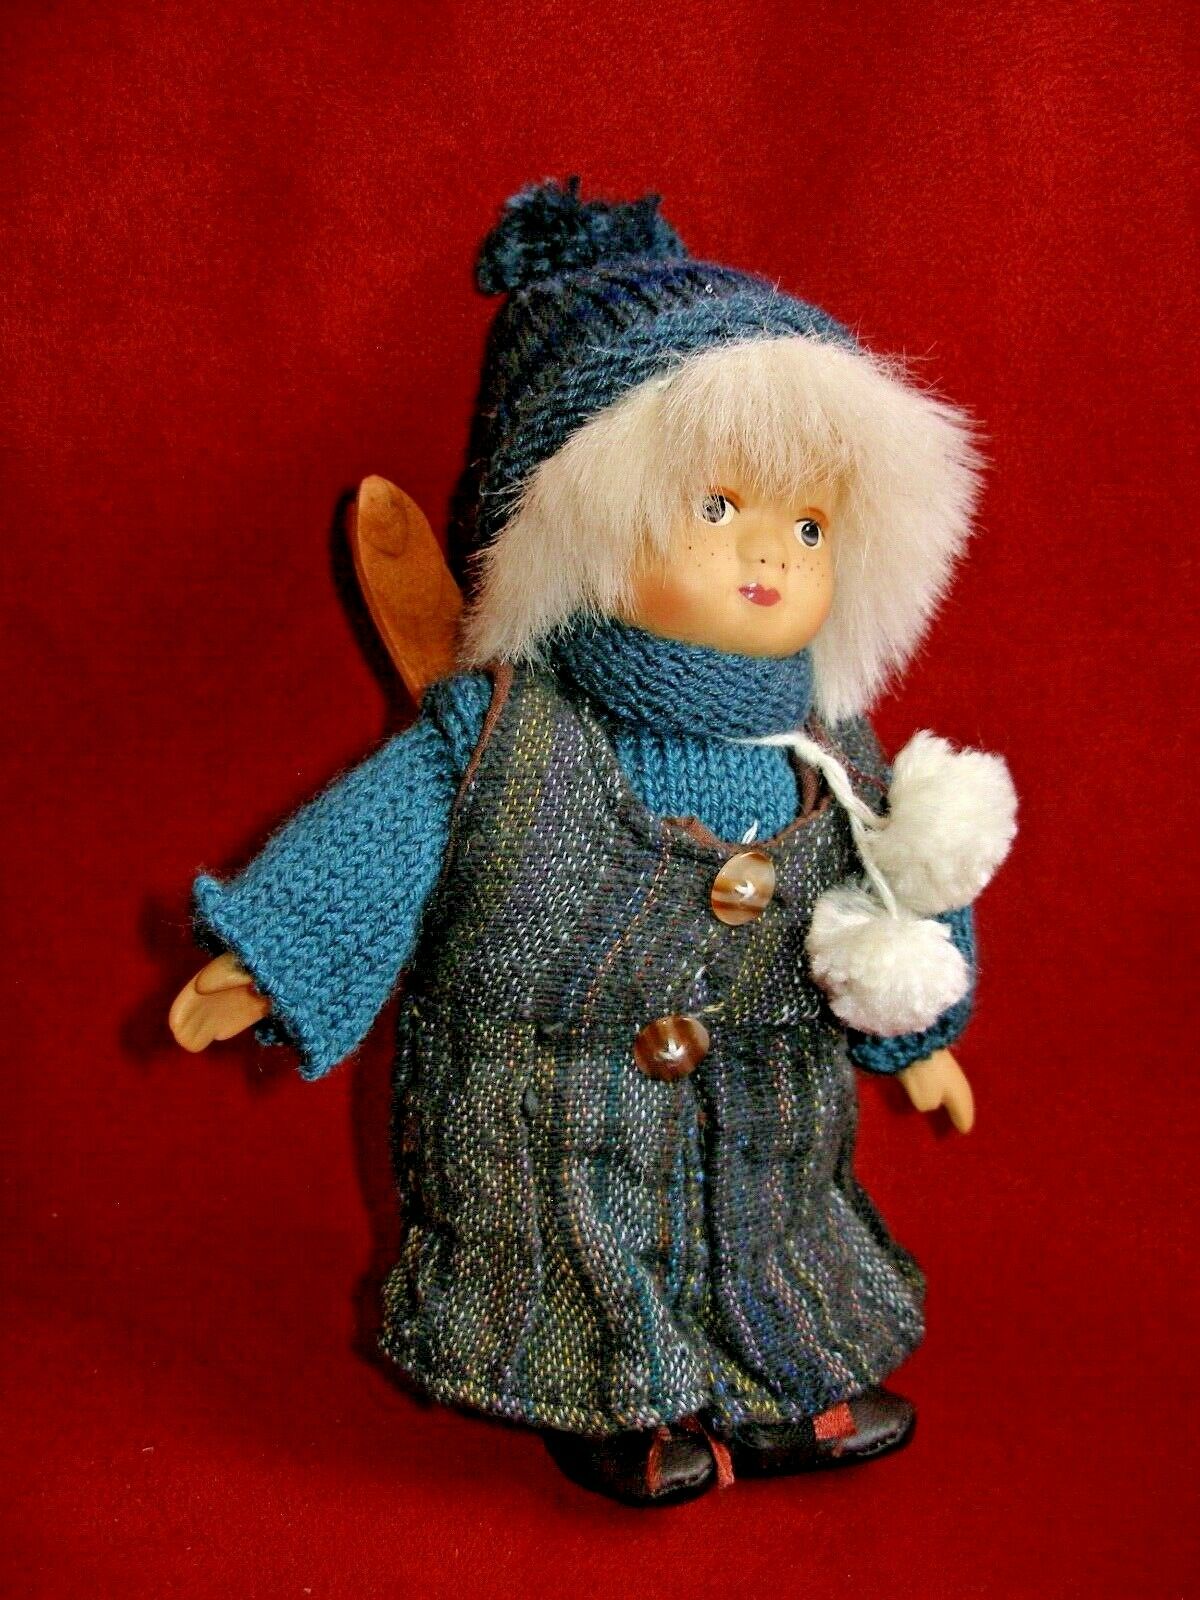 Vintage Bisque & Cloth Doll With Skis. Knit Hat. 7".